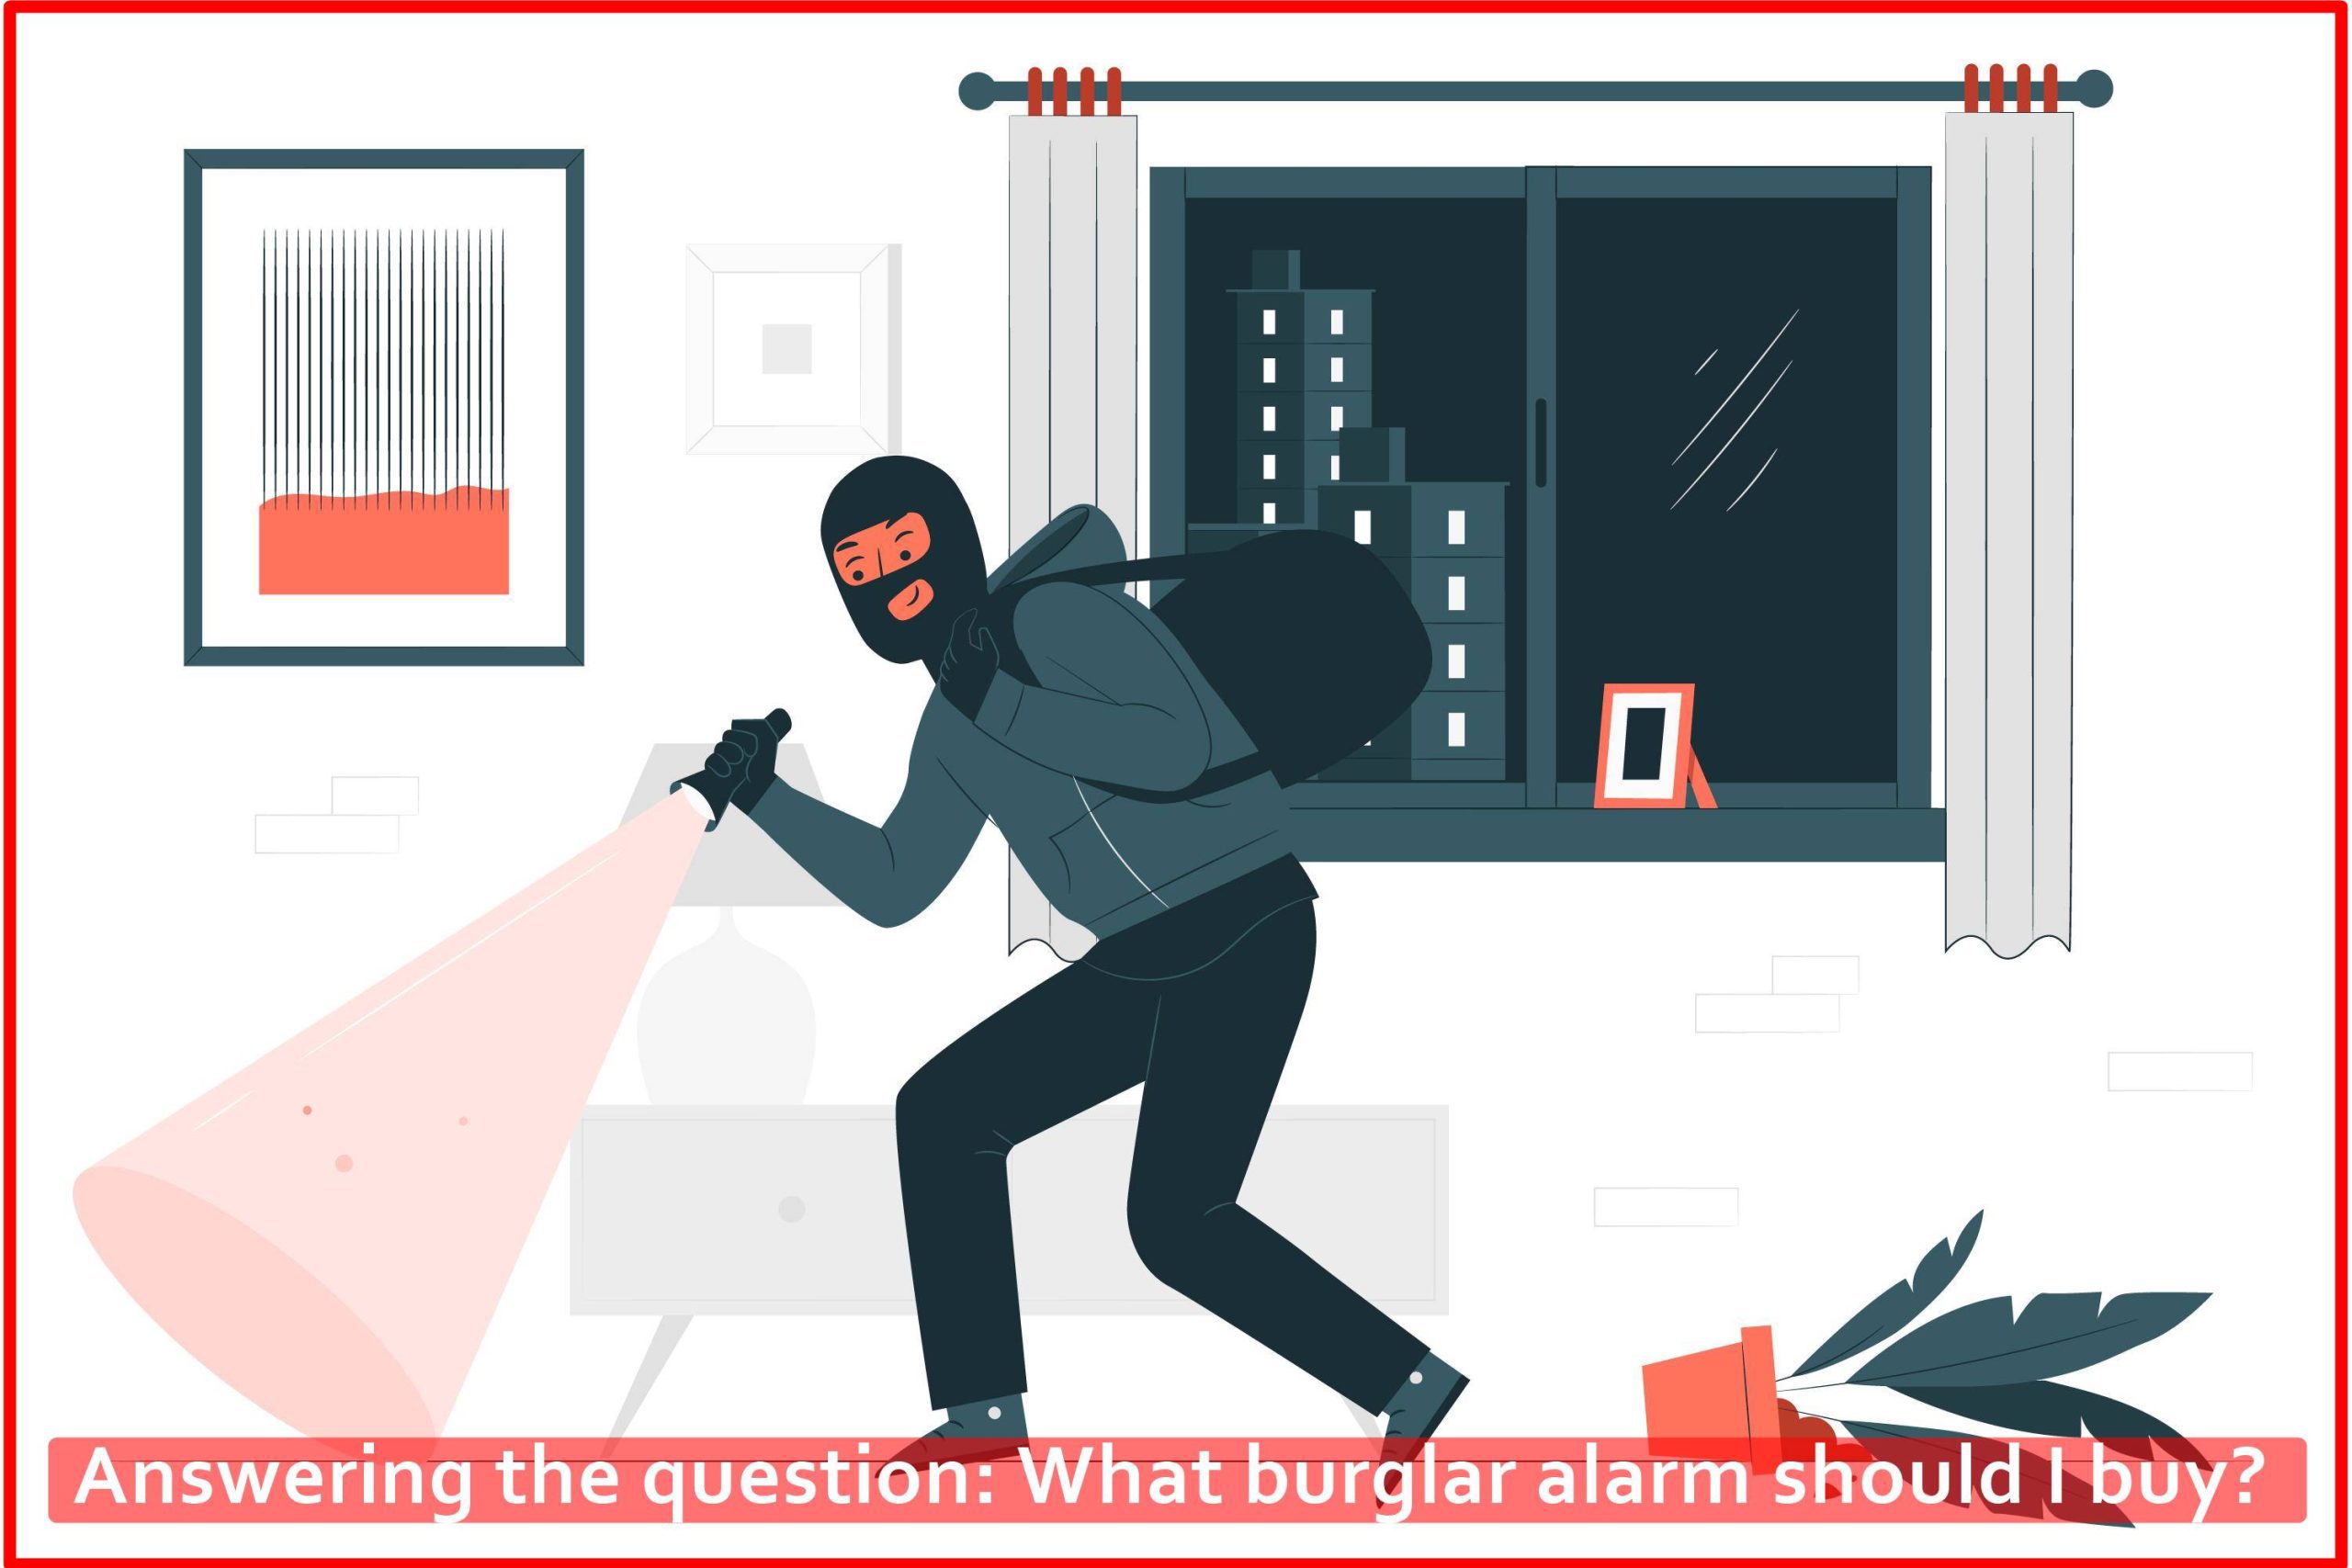 Answering the question: What burglar alarm should I buy?